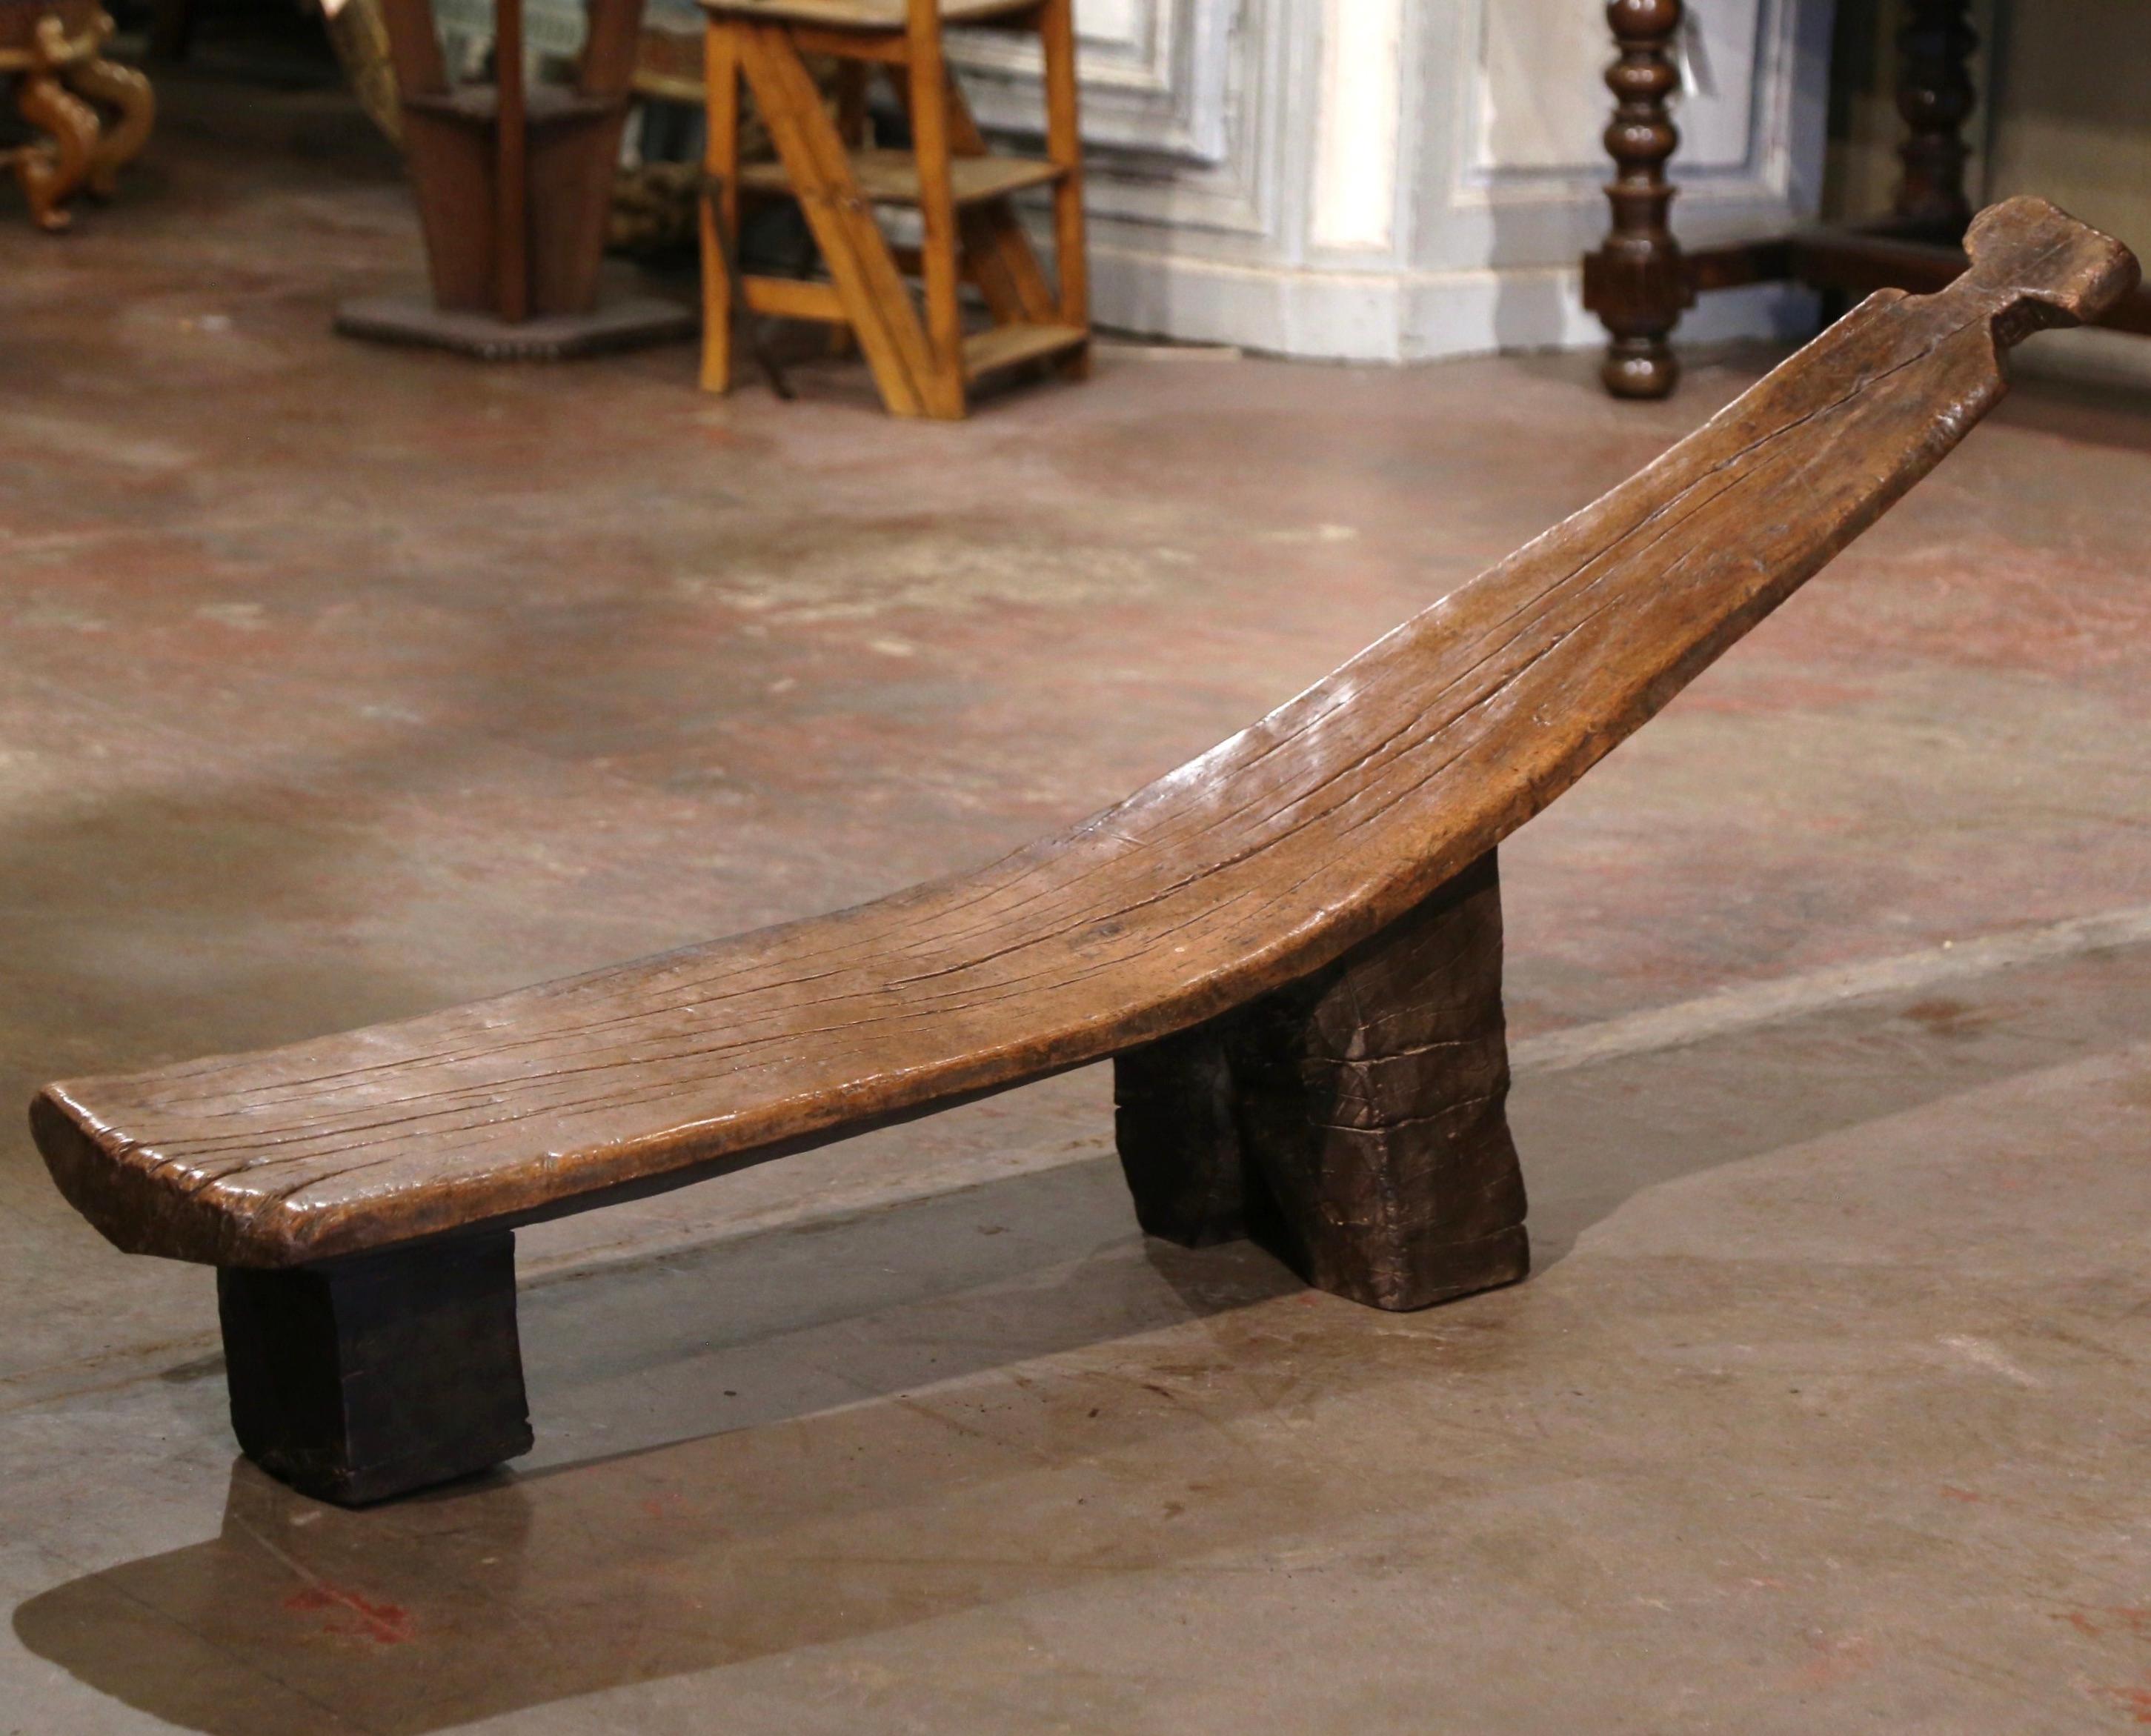 Decorate a den or game room with this elegant antique tribal bench. Hand carved in western Africa, and attributed to the Senufo tribe, the bench is naturally curved and stands on two carved legs. The seat is made of one single piece of indigenous